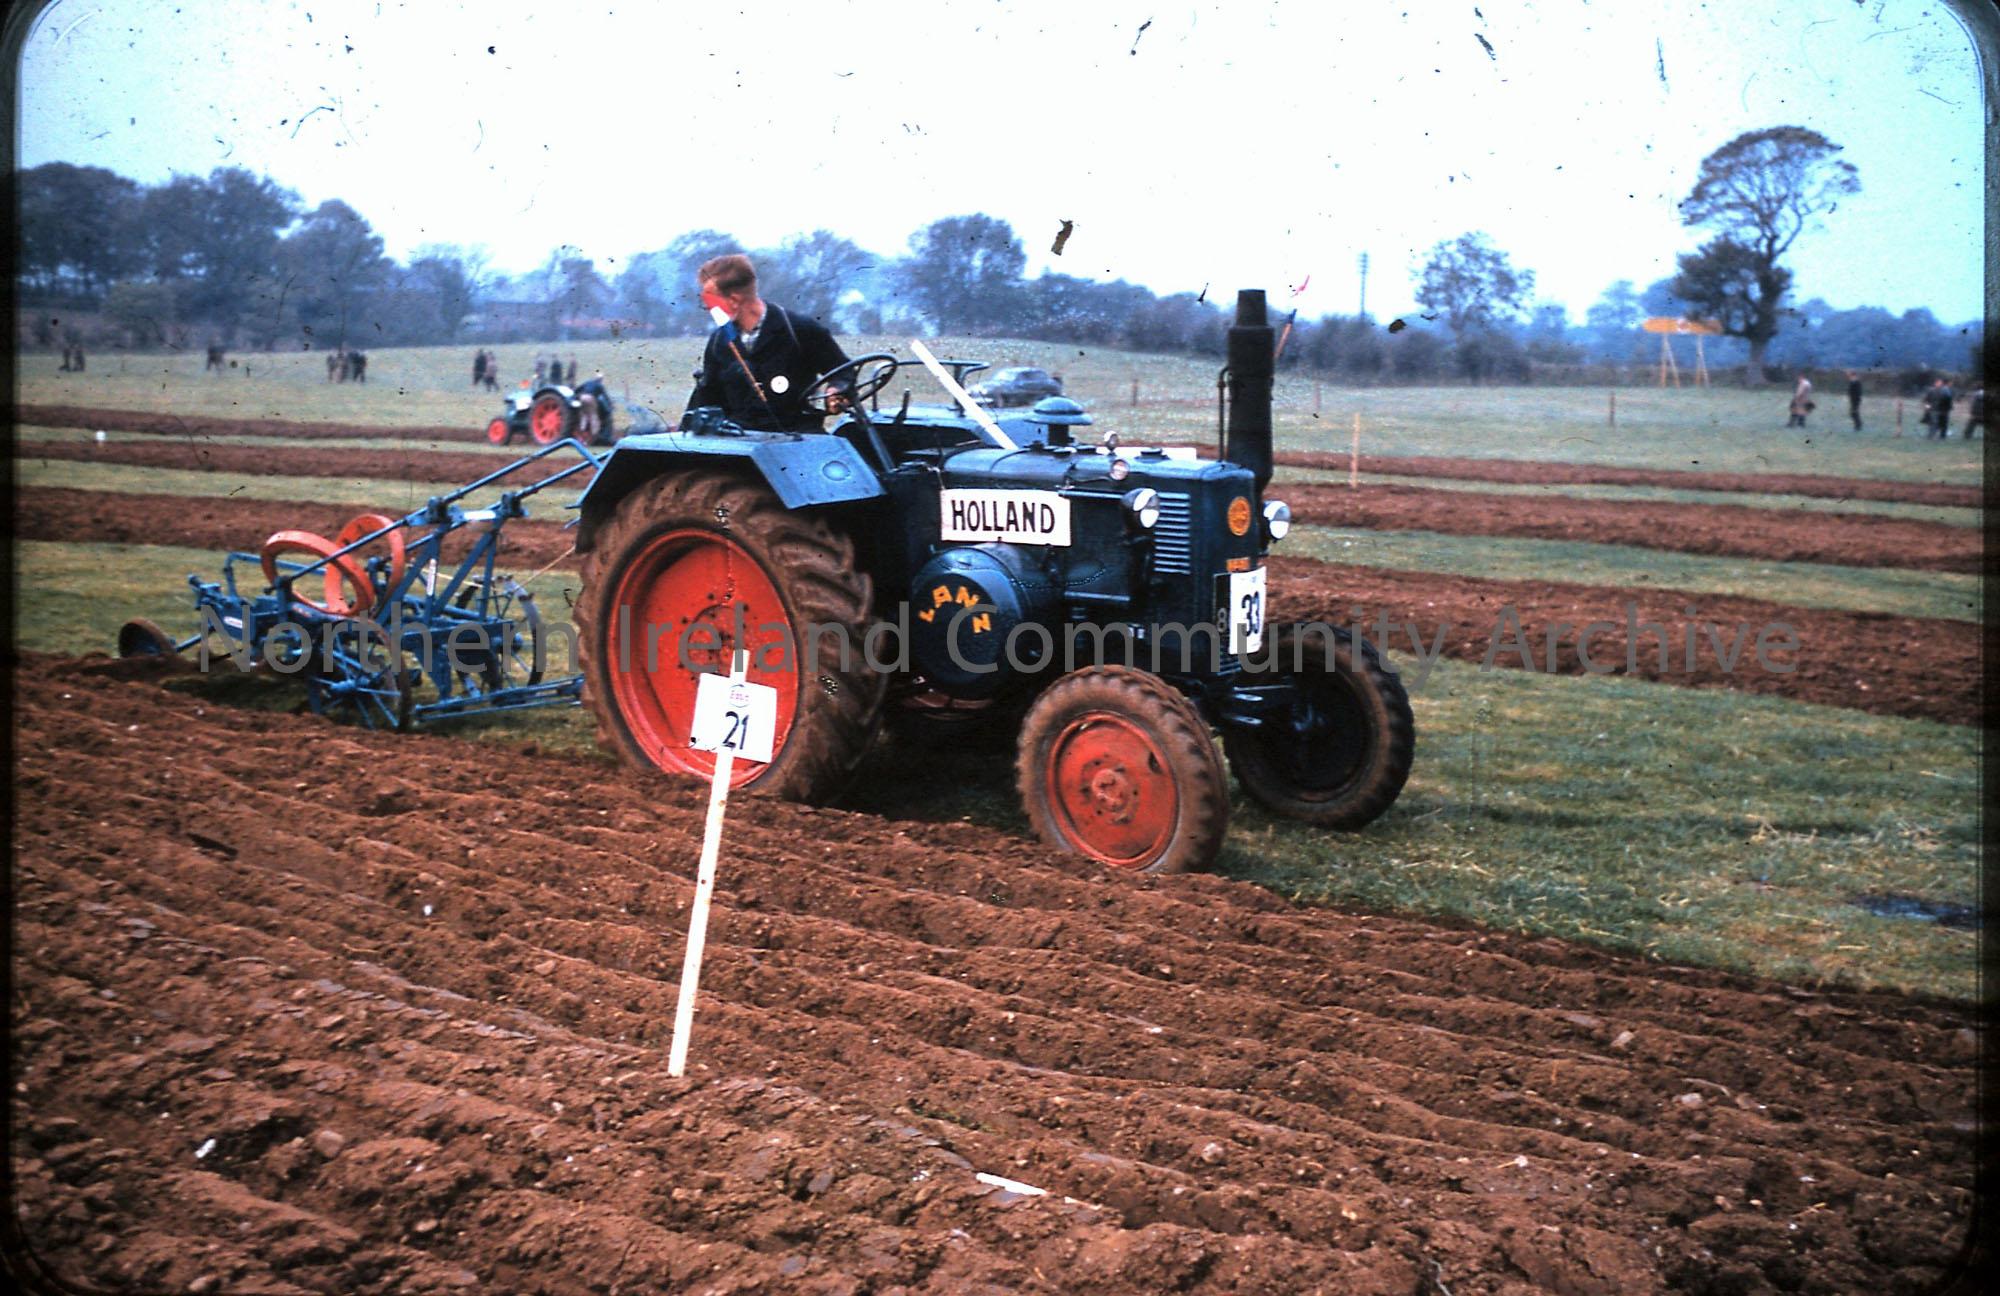 International ploughing match, 1959- Holland competitor